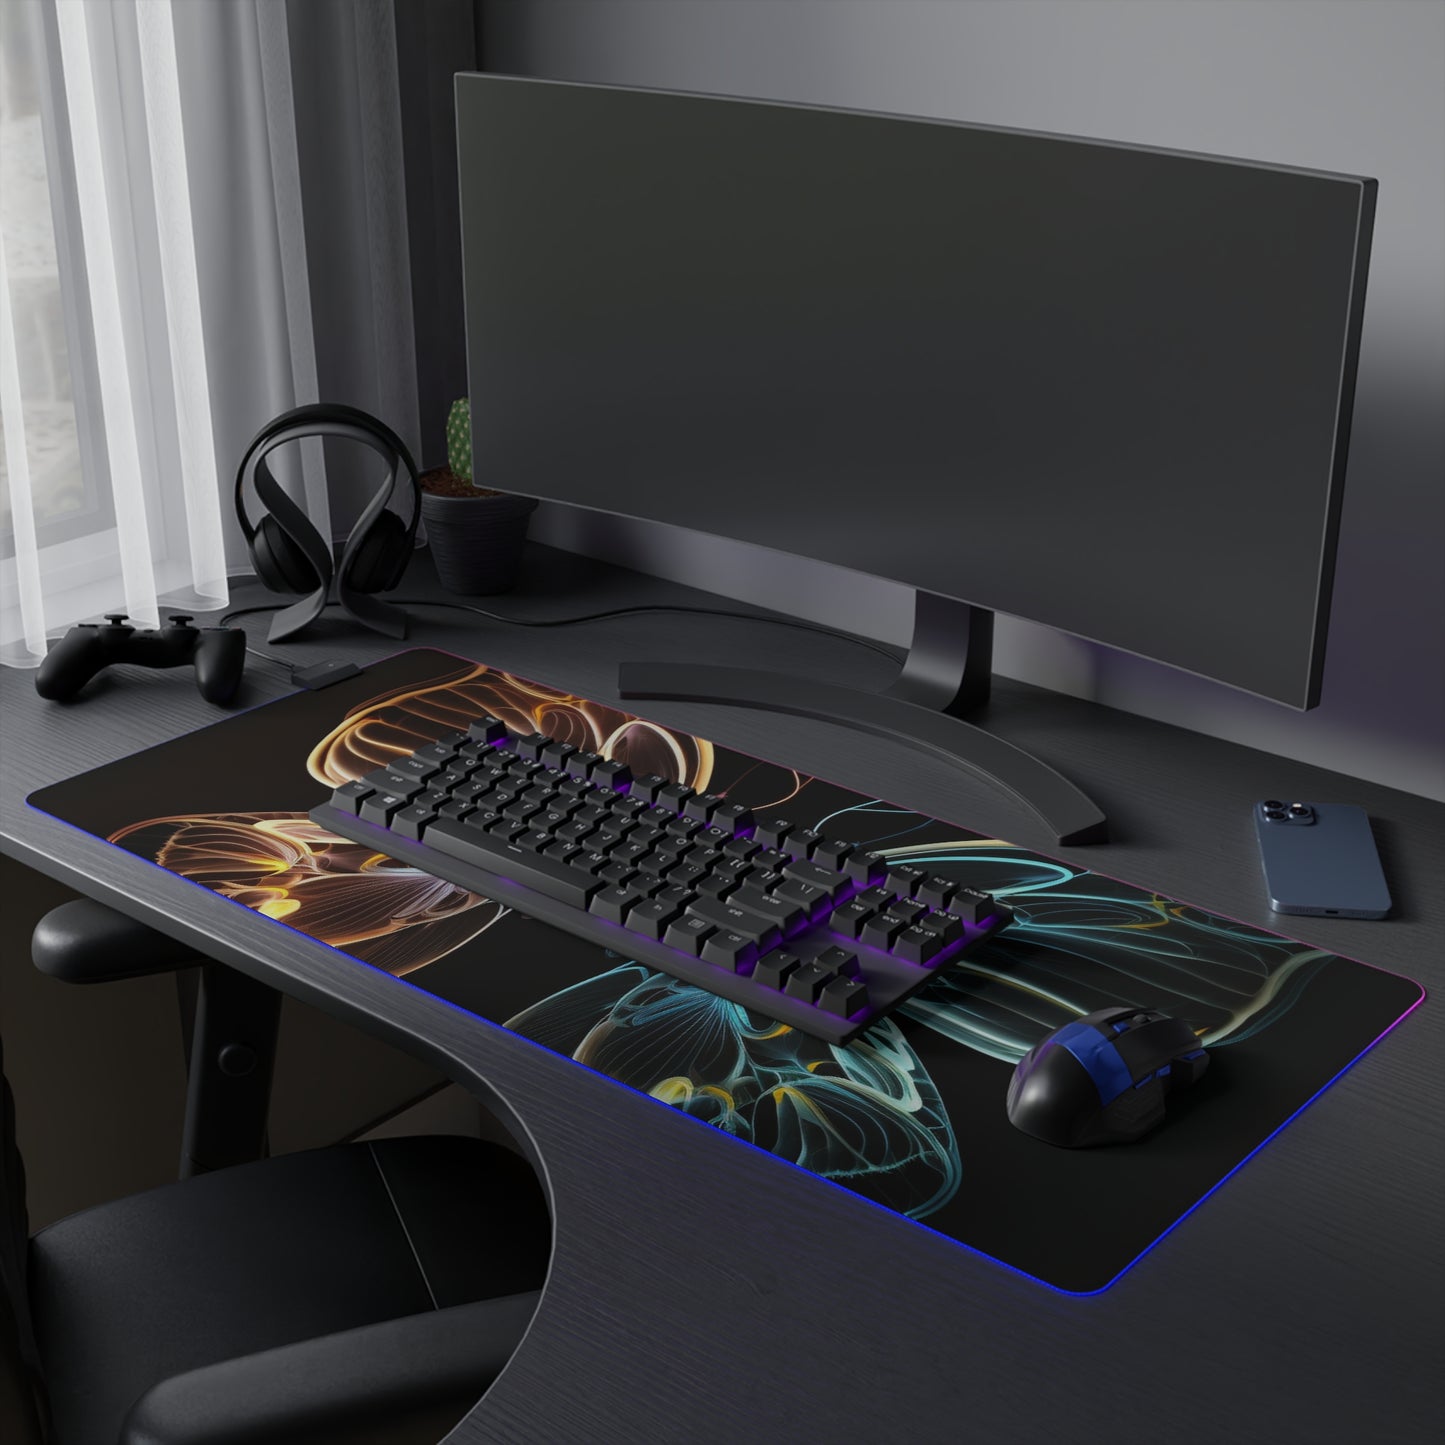 LED Gaming Mouse Pad Neon Glo Butterfly 3